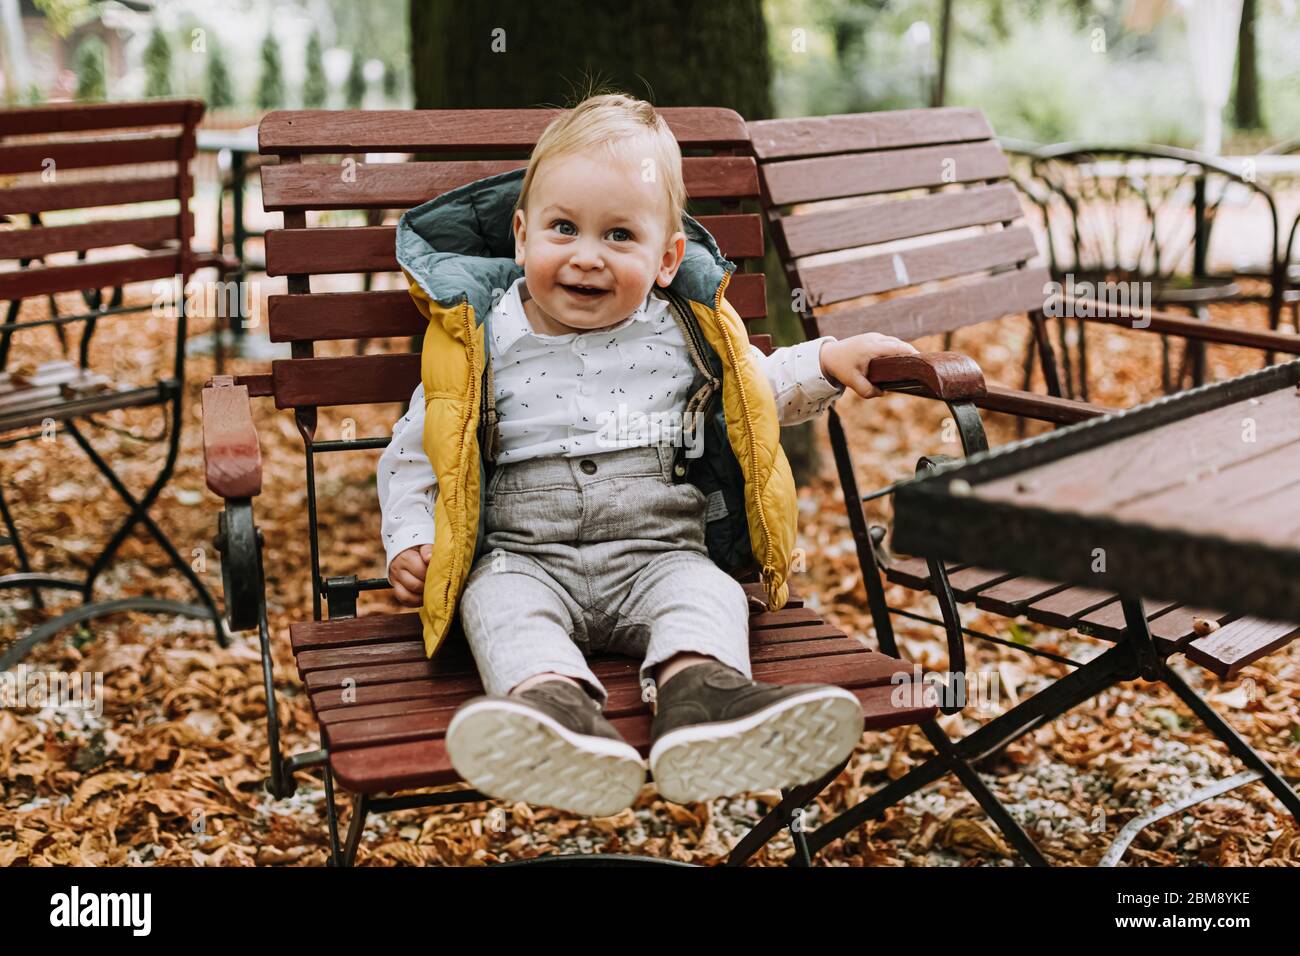 1 year old cute boy in stylish yellow jacket smiling and sitting on the chair in the park Stock Photo